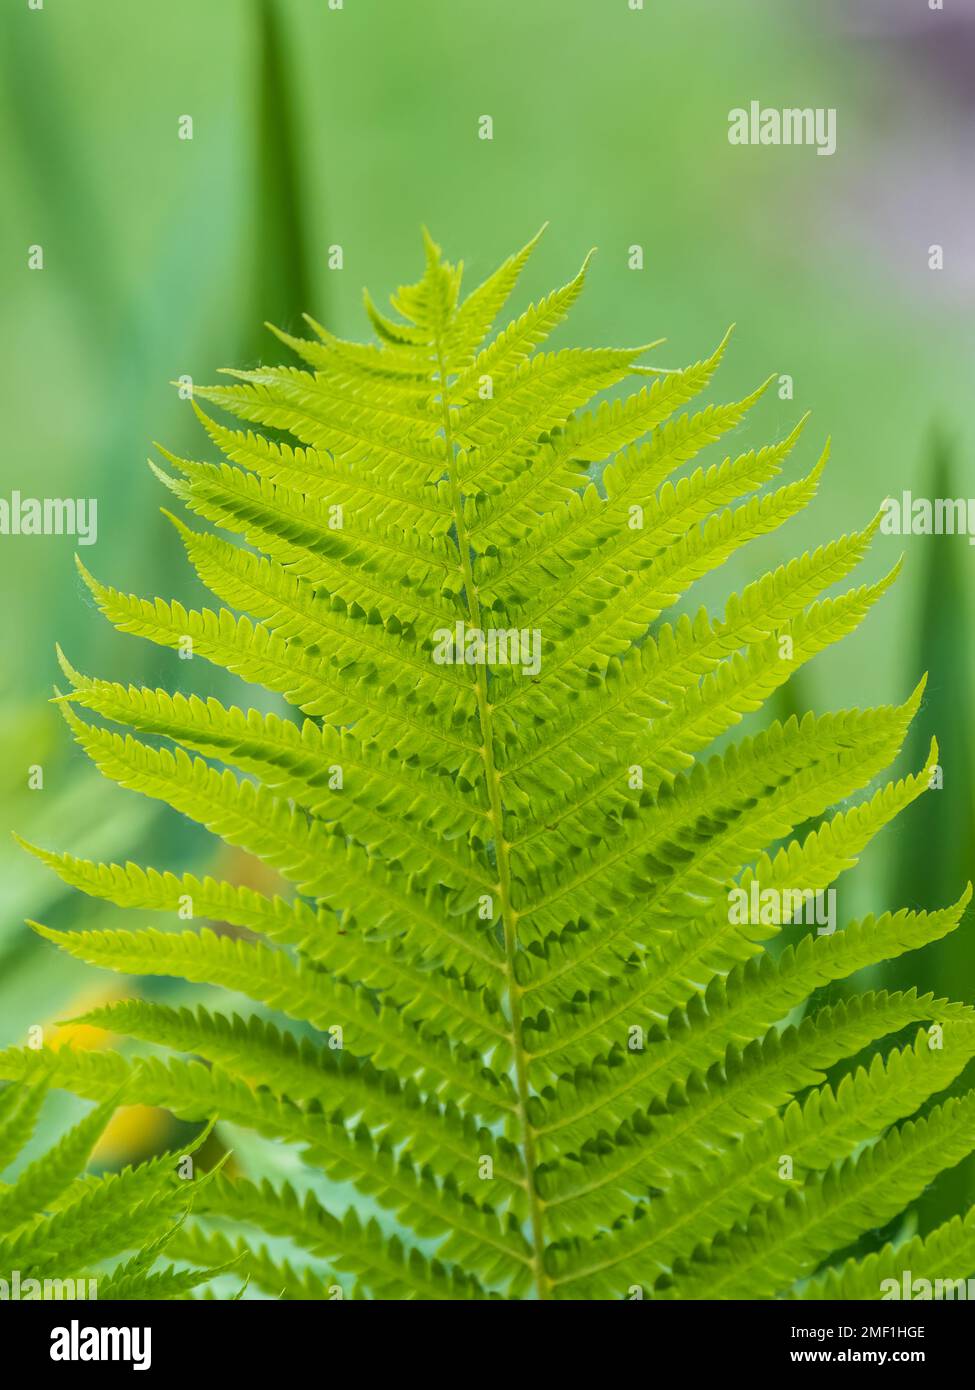 Prickly shield fern close up shoot of plant. Macro closeup of new curly young green leaves of soft fern Polystichum aculeatum evergreen species backgr Stock Photo